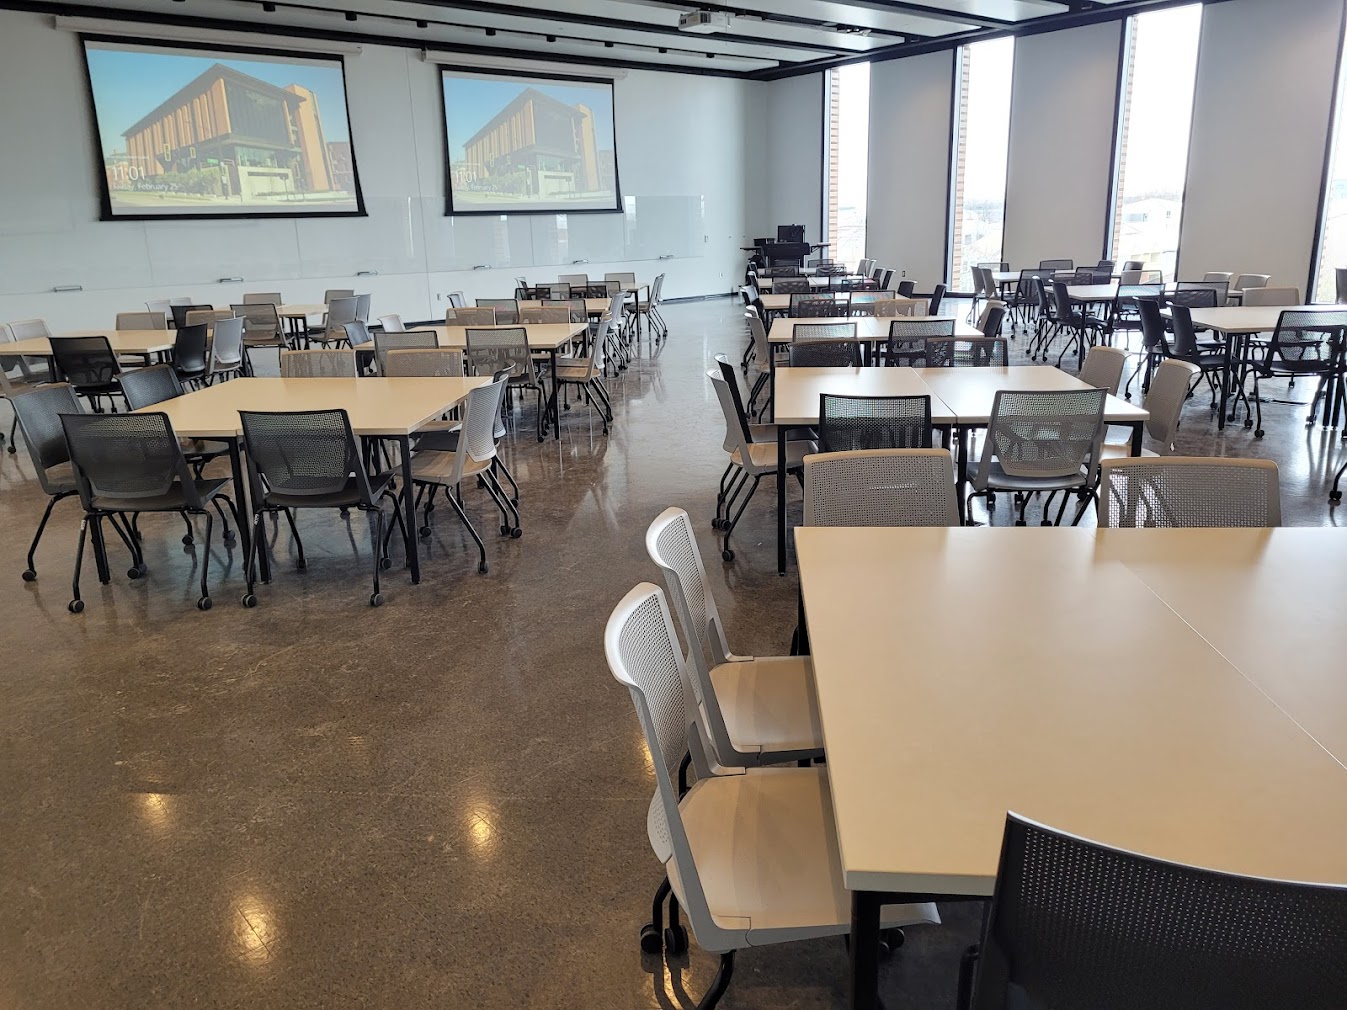 This is a view of the room with student desks, projection screens, a front lecture table, windows, and glass boards.